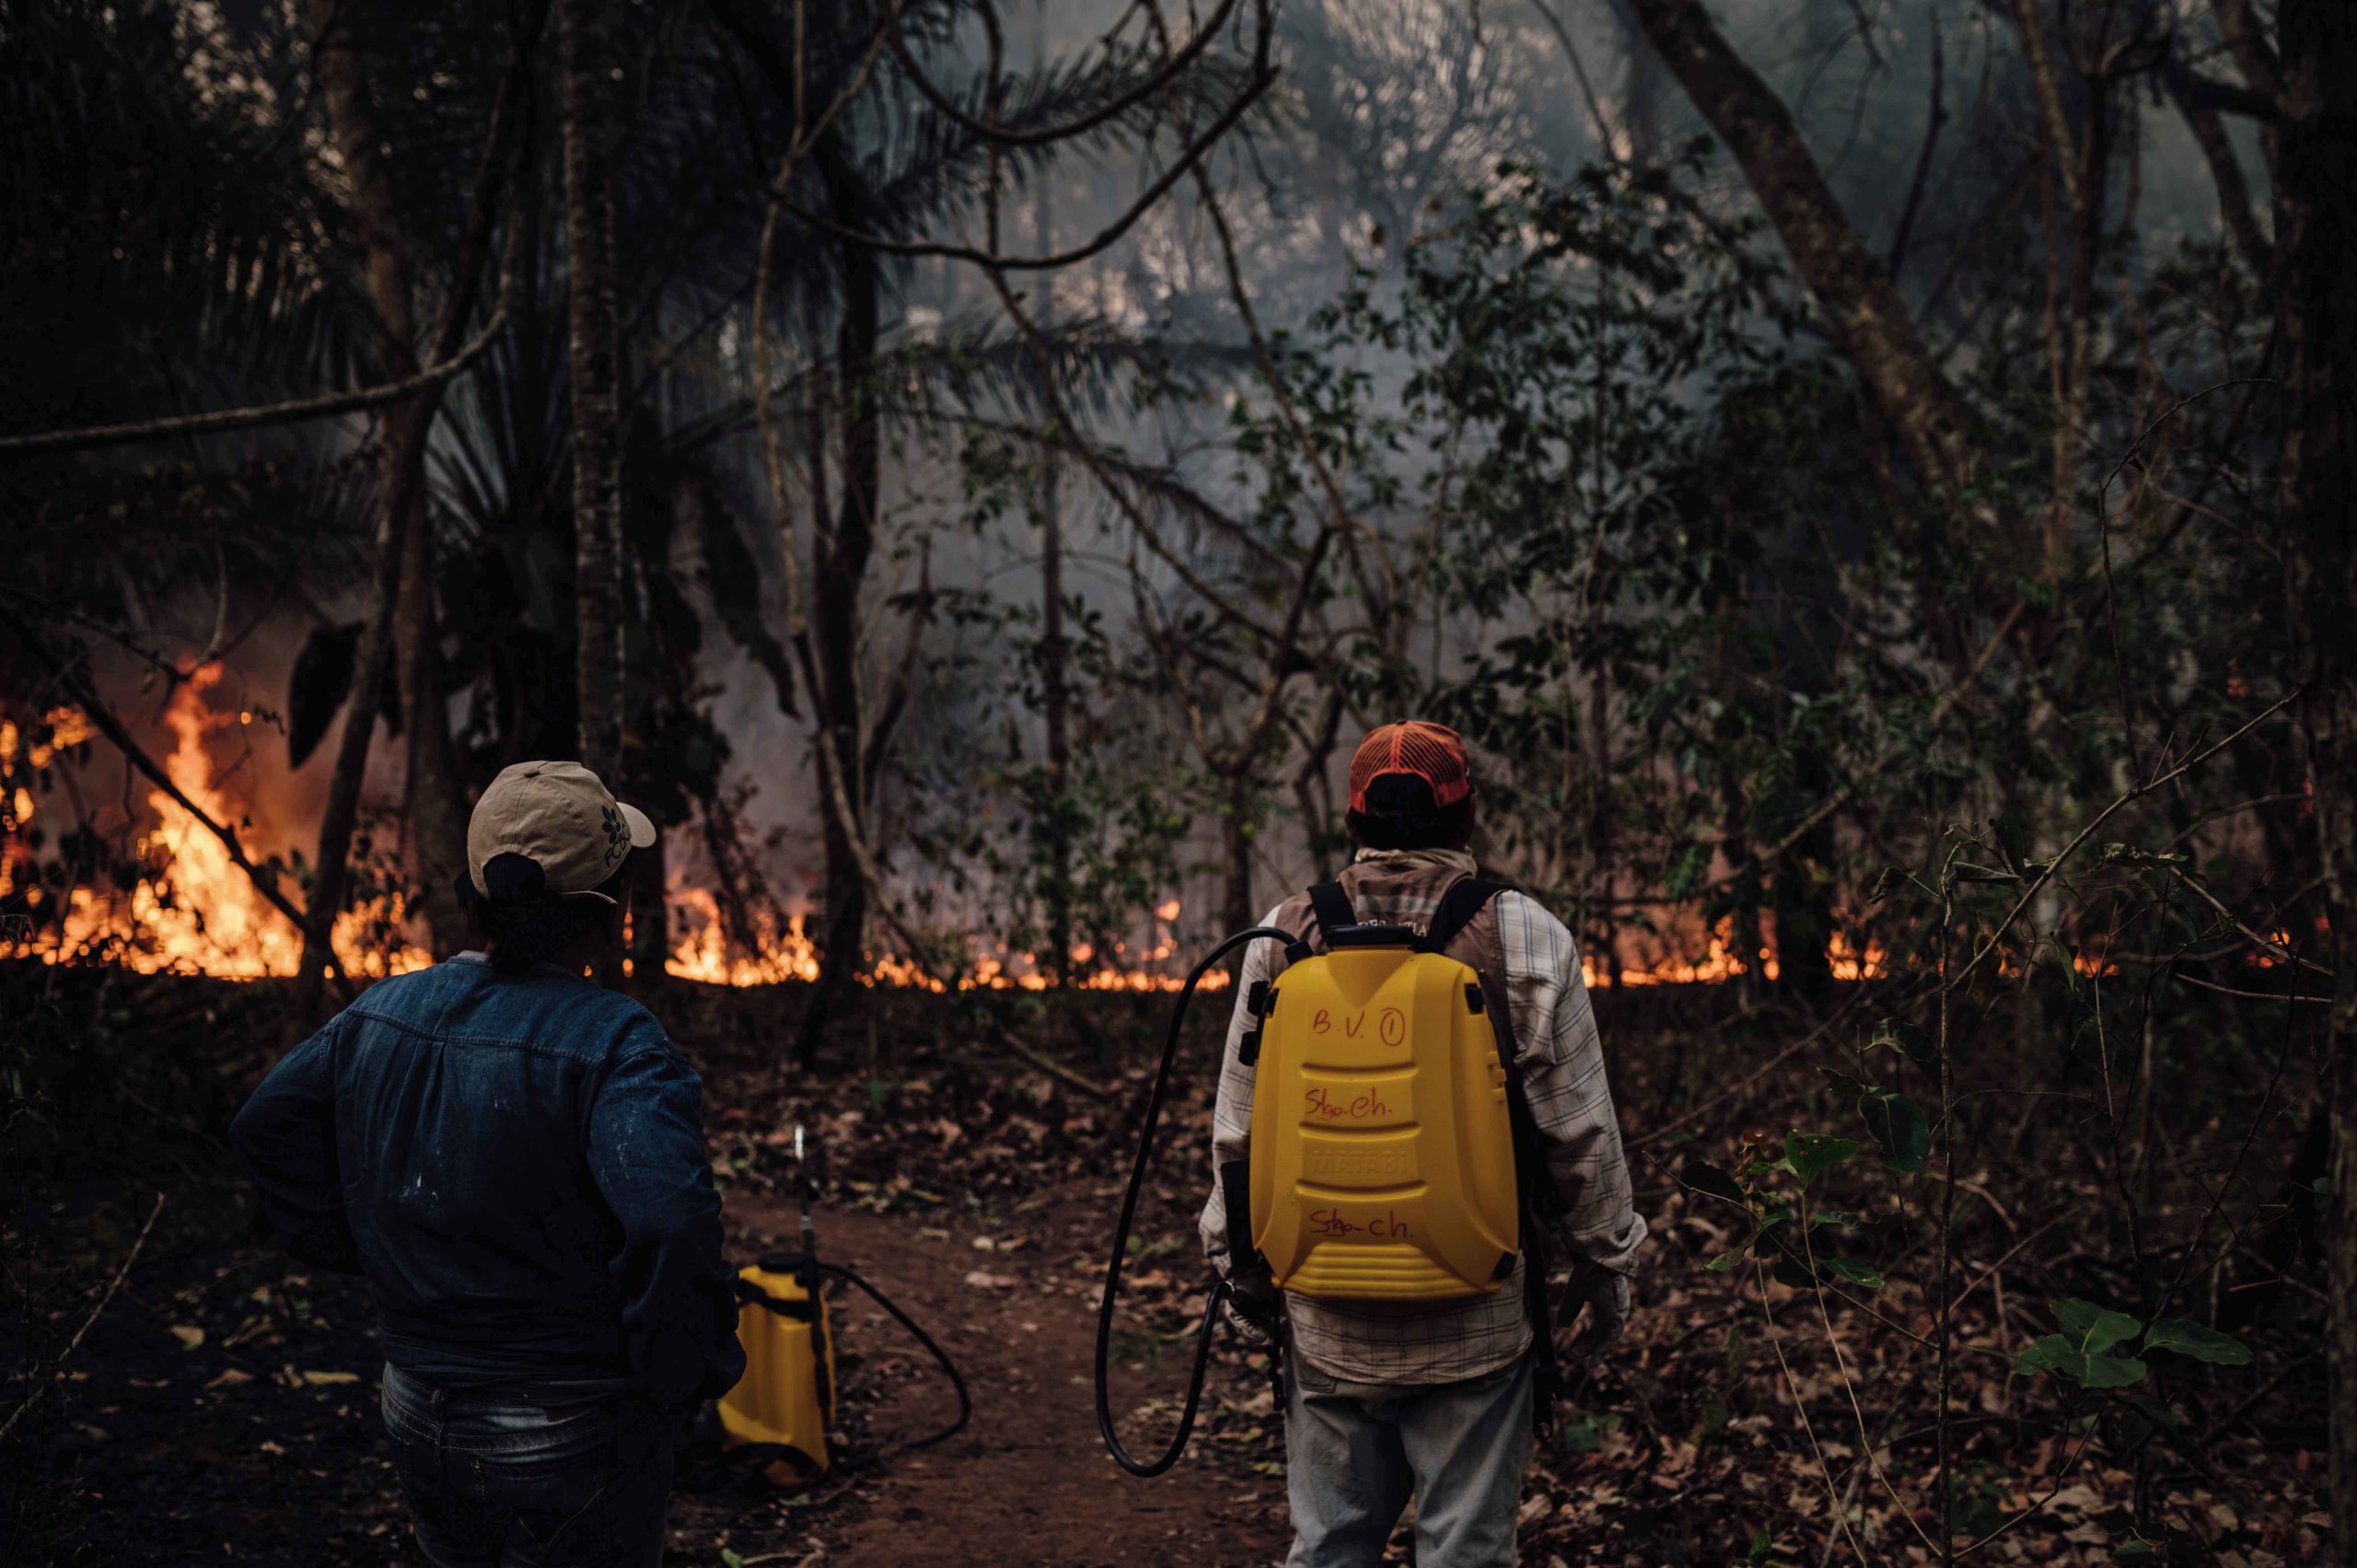 Community members from Santiago de Chiquitos attempt to stop the fire from advancing on the border of the Tucabaca Valley protected area. Image by Claudia Belaunde.